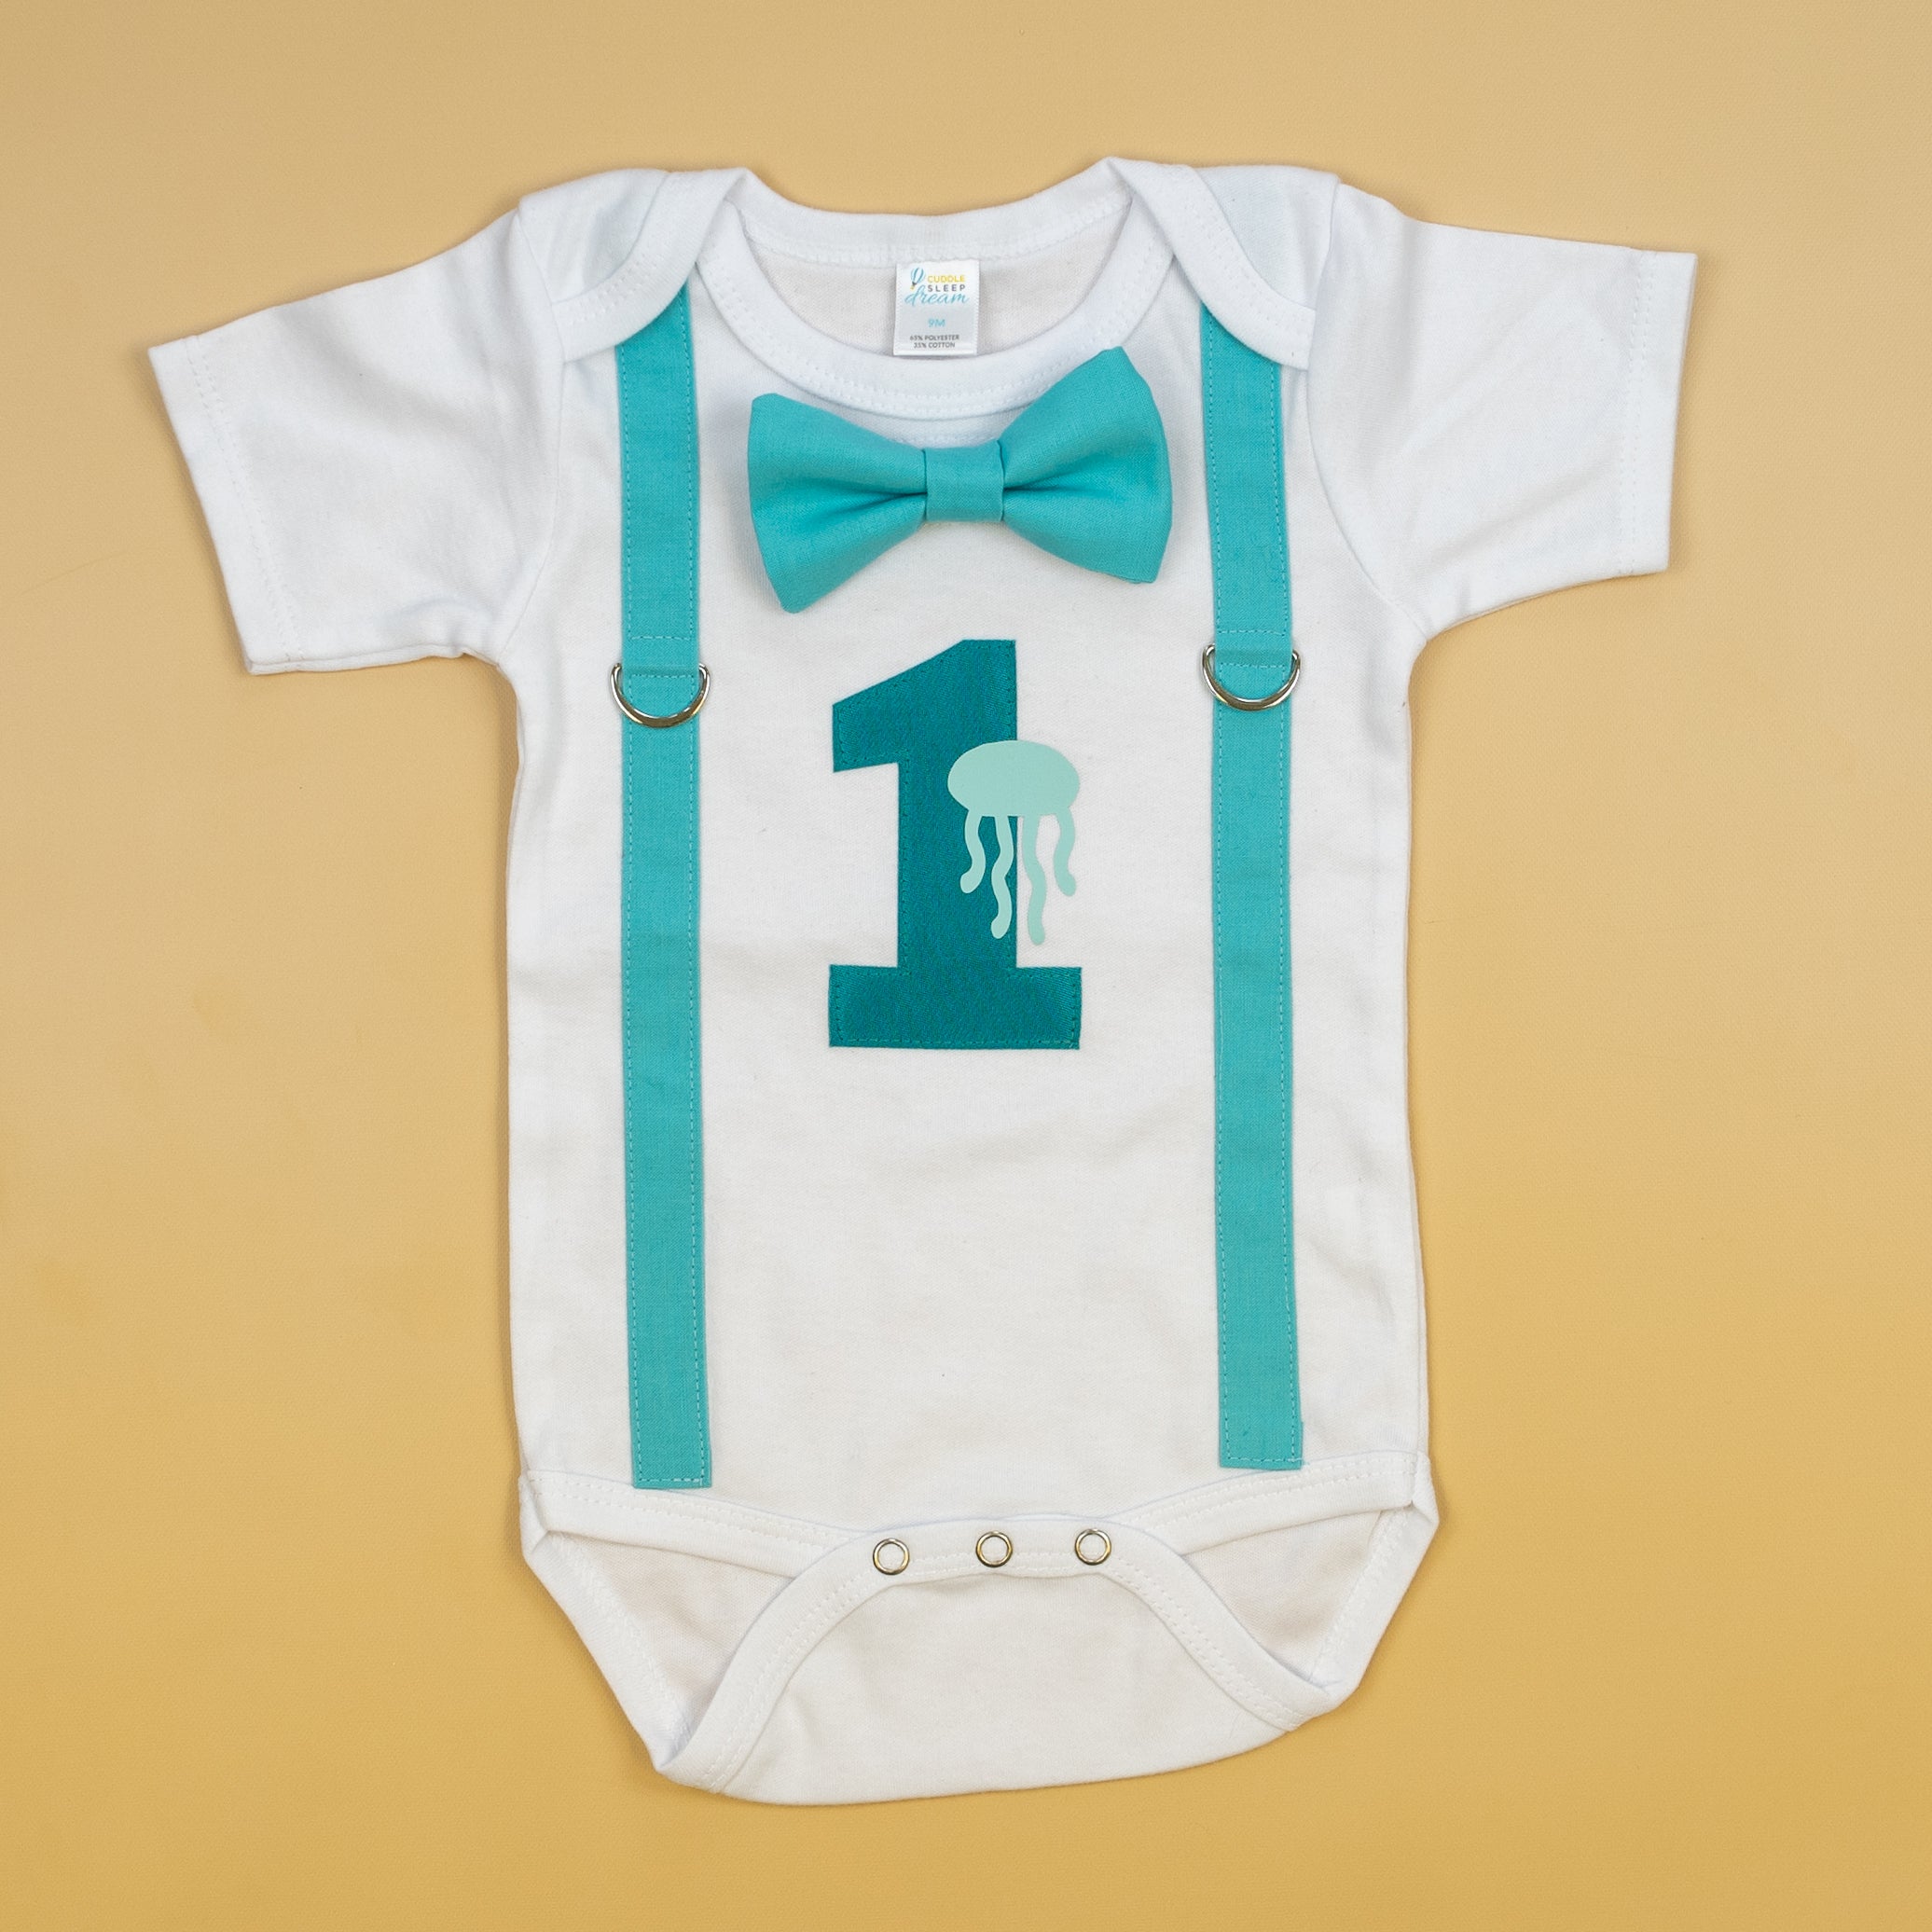 Under The Sea 1st Birthday Outfit for Boys | by Cuddle Sleep Dream 24M Short Sleeve Bodysuit for Infant